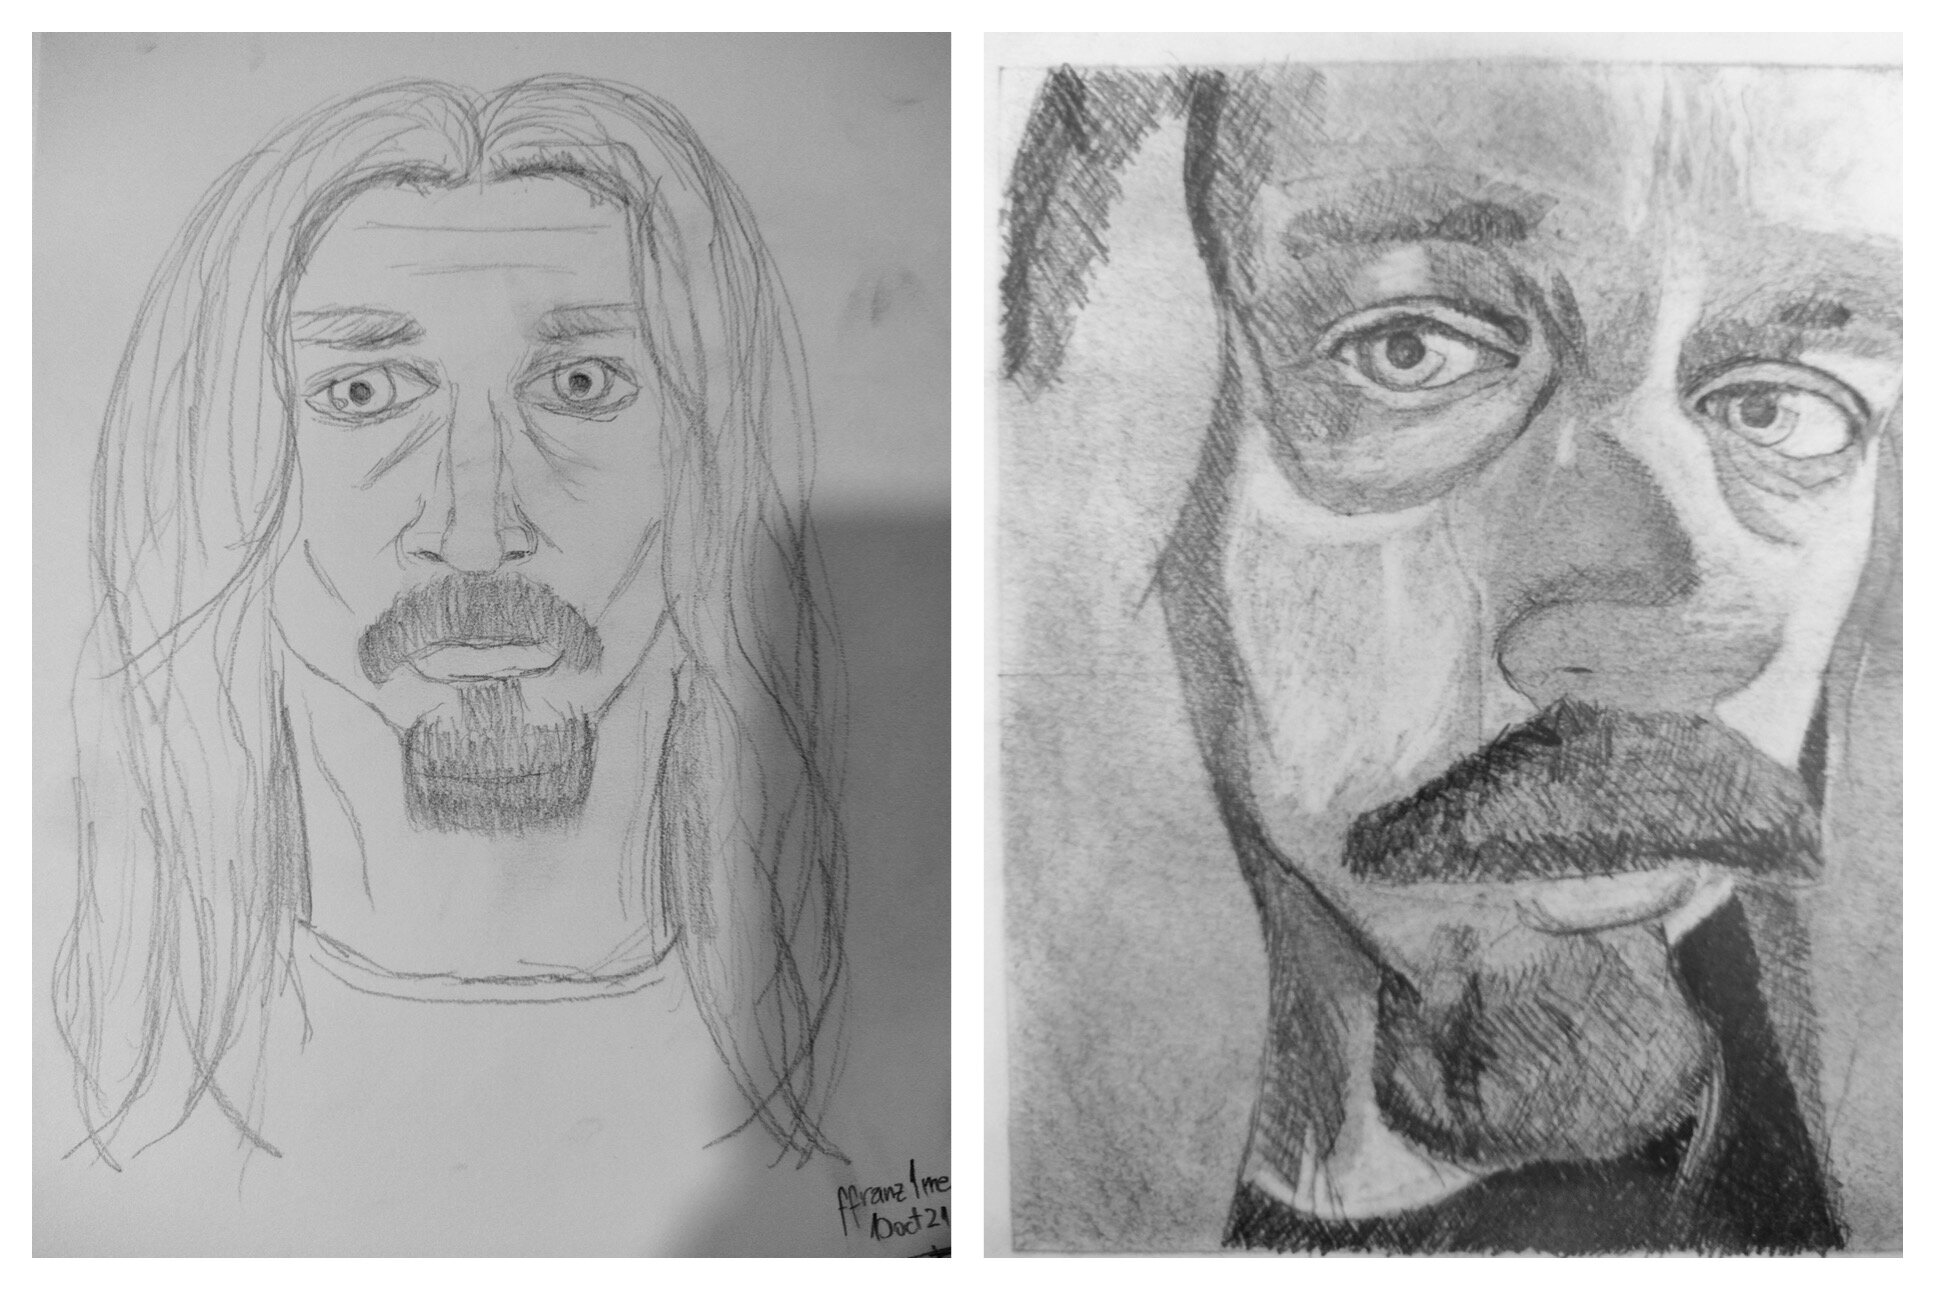 Fabiano's Before and After Self Portrait Drawings Oct 11-6, 2021